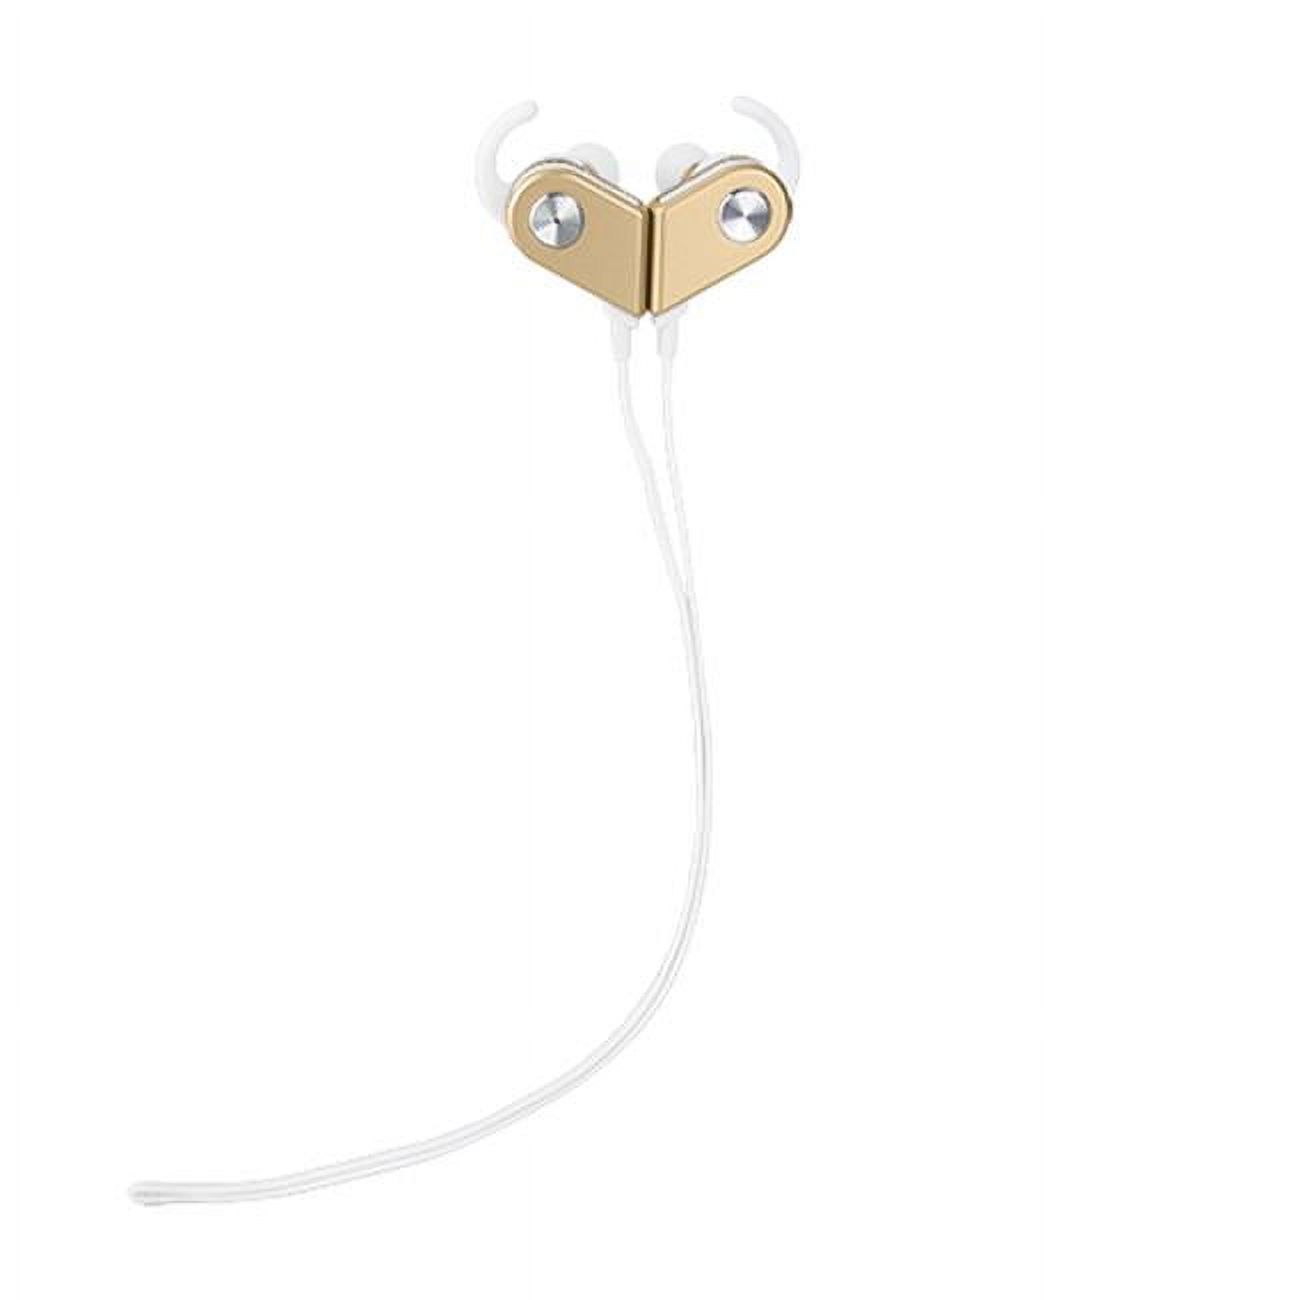 Xenith Xenith-Gold6 Magnetic Bluetooth Headphones Wireless Stereo Headset Earbuds Earphone Universal - Gold - image 1 of 1